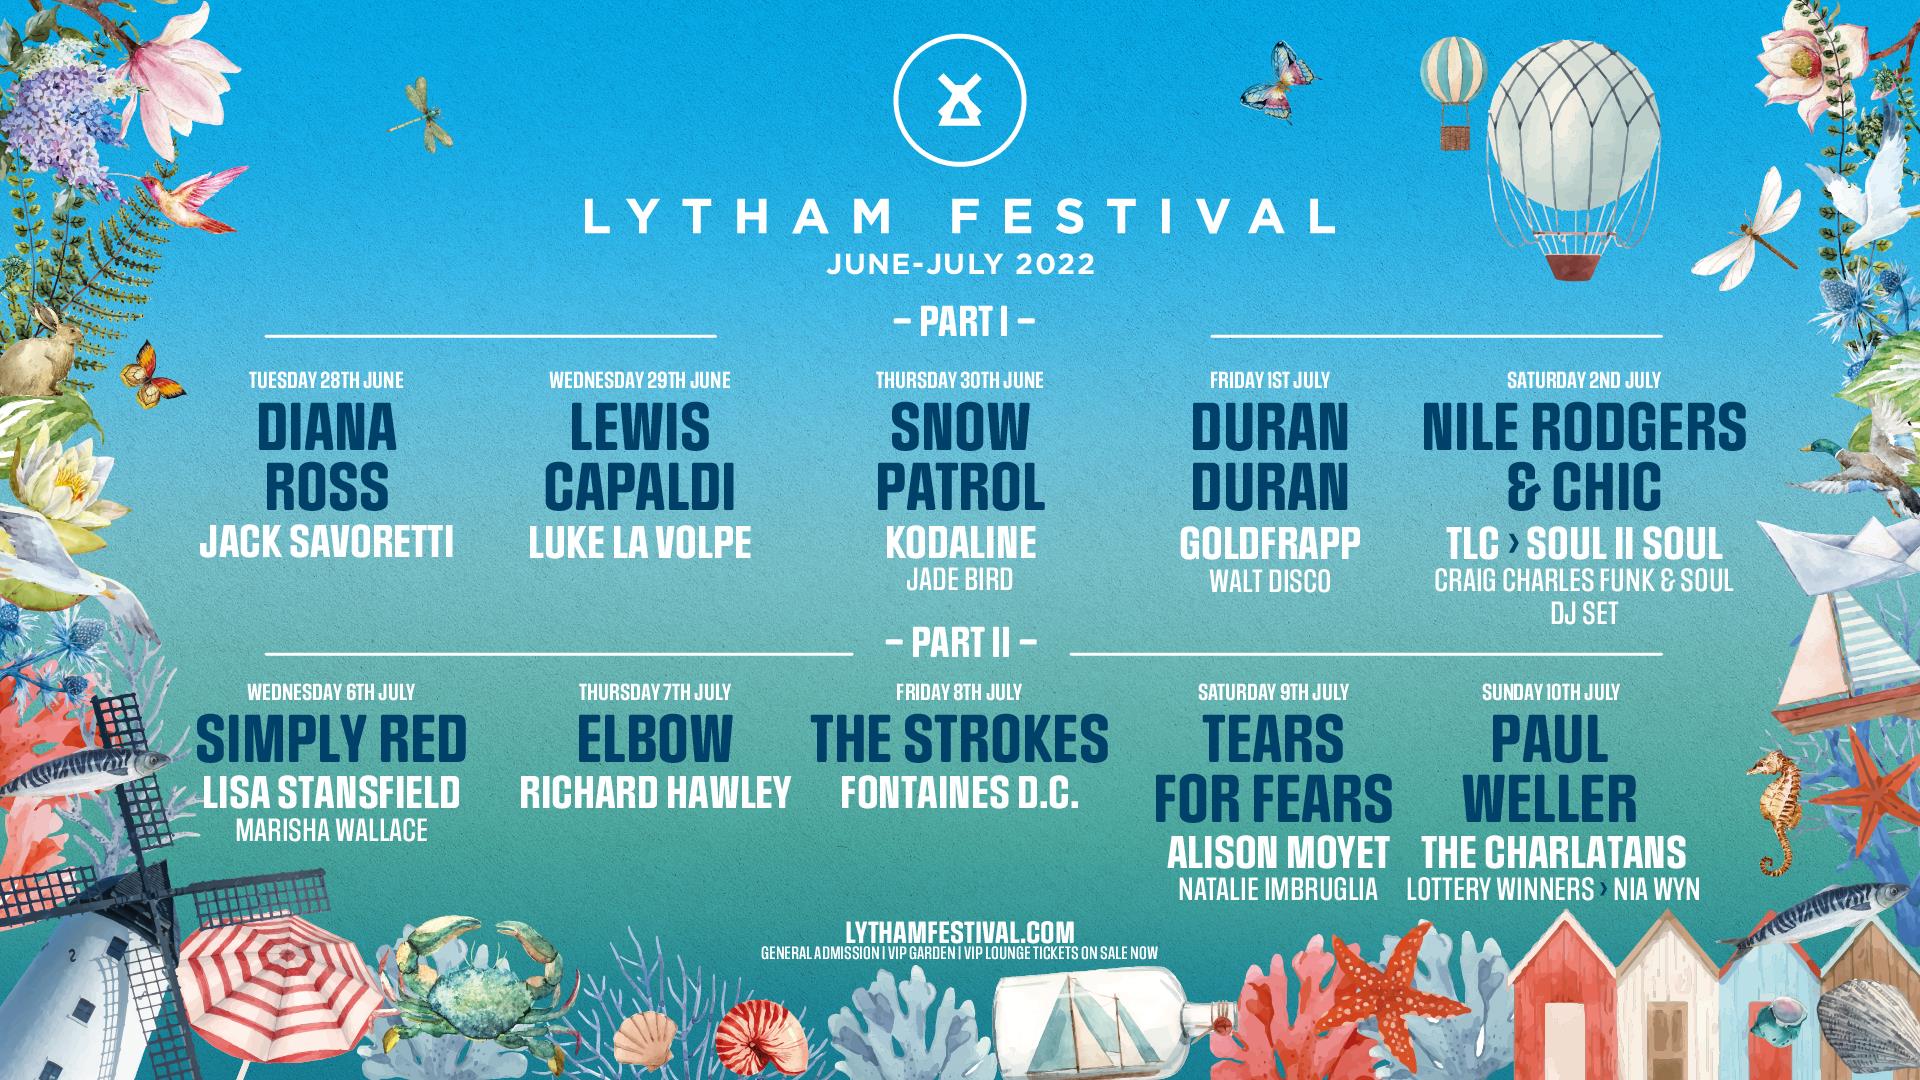 Lytham Festival 2022 – Tears For Fears - Lowther Pavilion